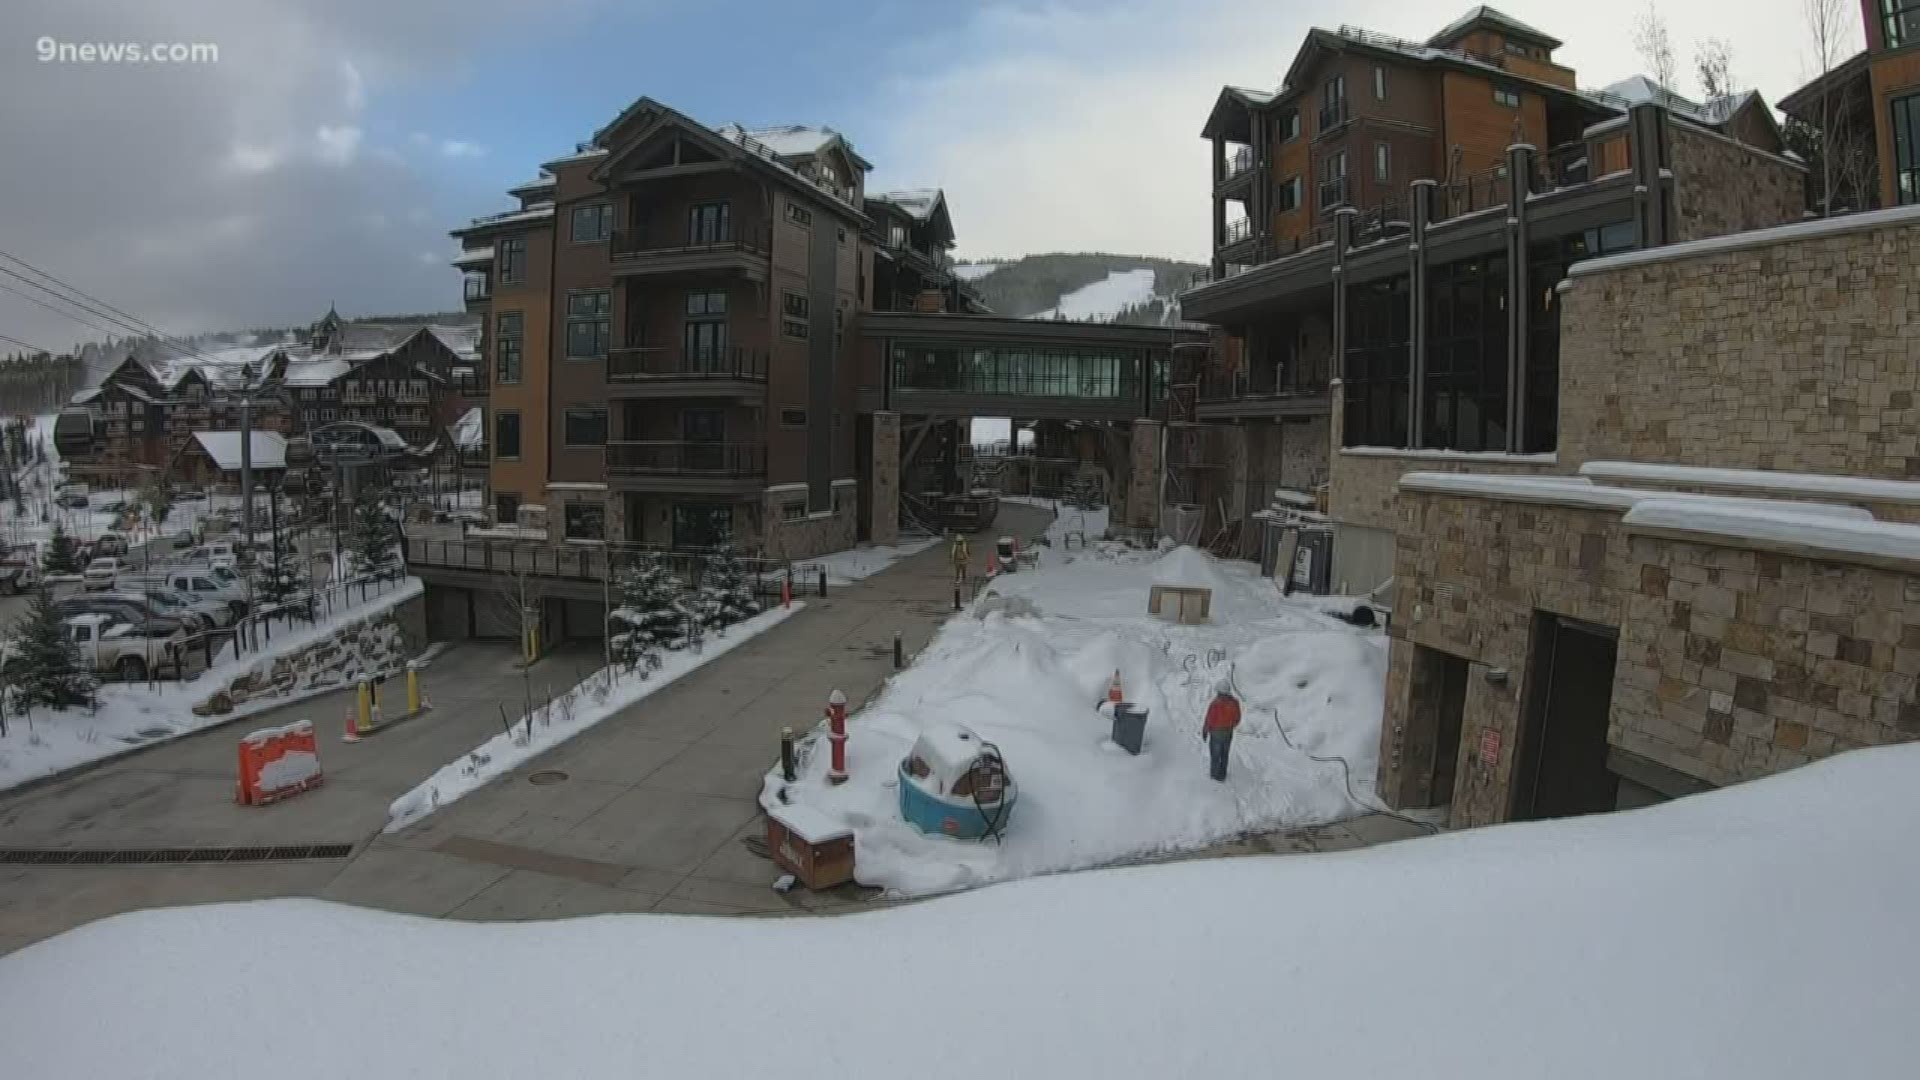 Breckenridge will open for the season in a few weeks and when it does skiers and snowboarders will see some big changes on Peak 8.